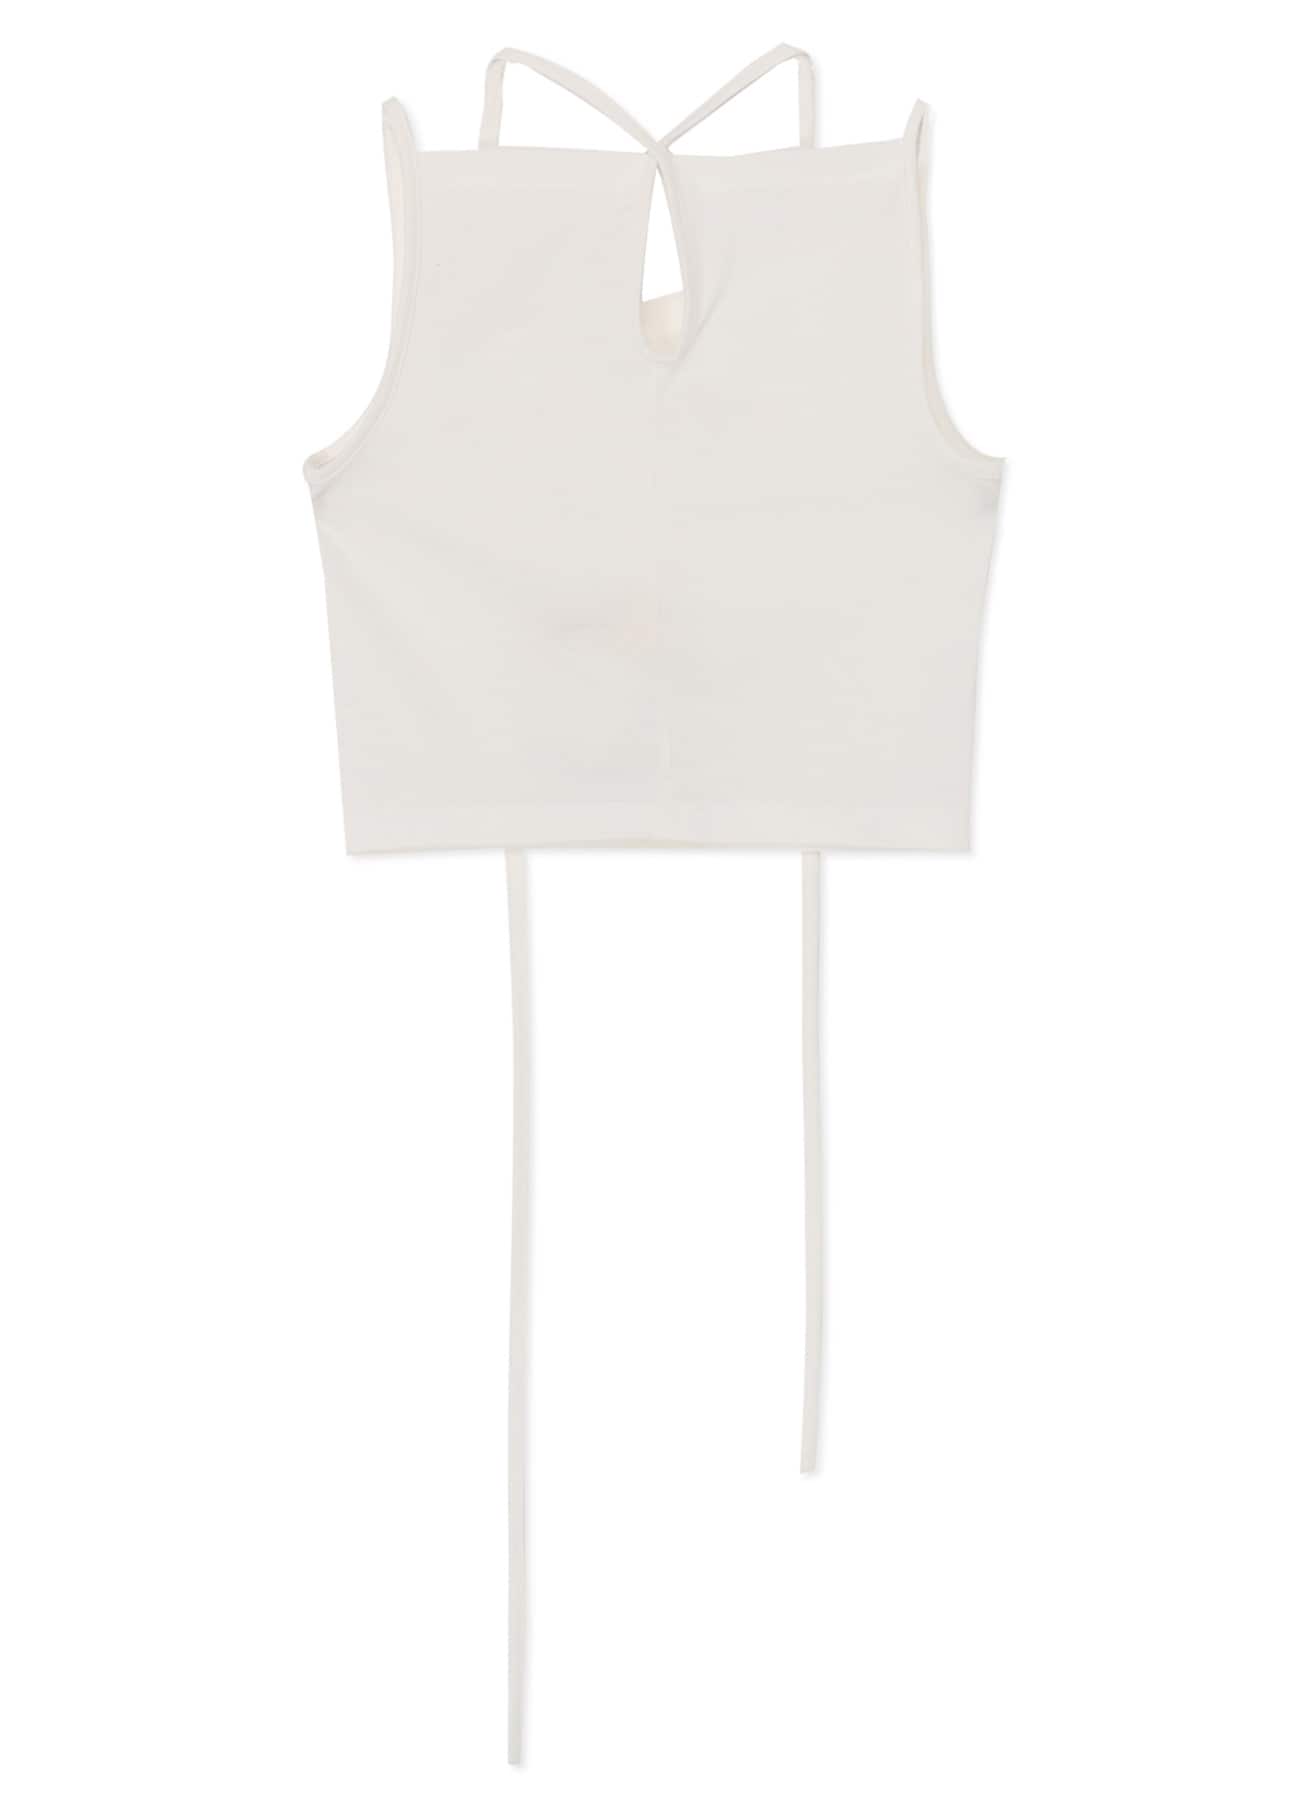 60/2 COTTON JERSEY LONG STRING CAMISOLE(S White): LIMI feu｜THE 